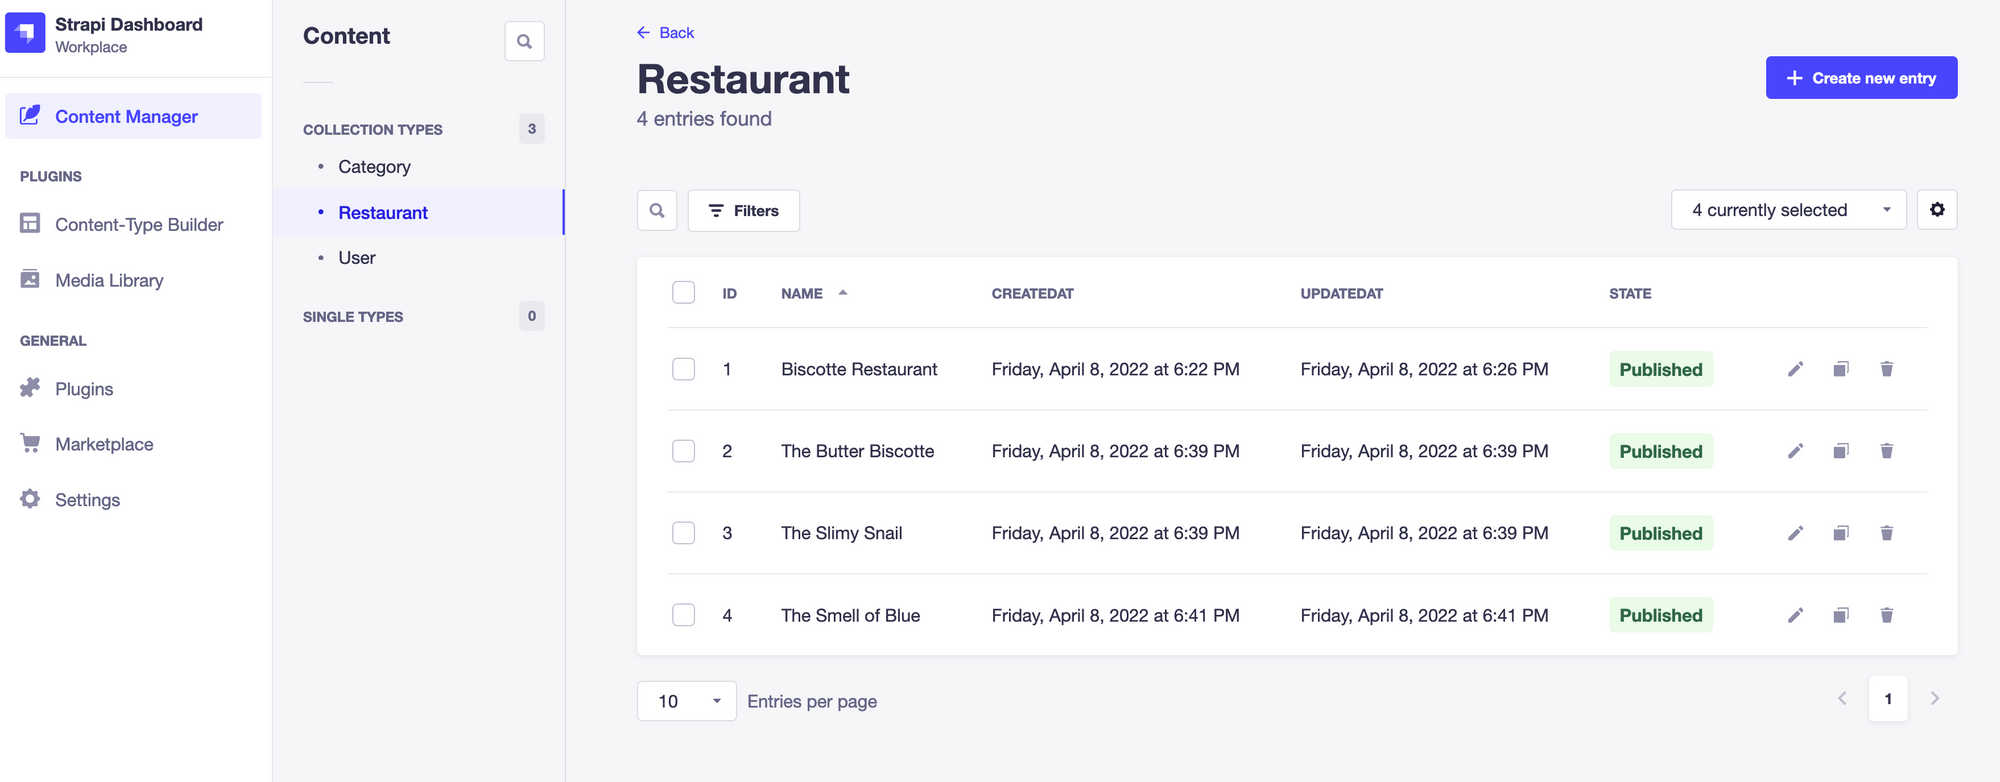 Strapi dashboard: list of the existing restaurant entries in the Restaurant Collection Type page